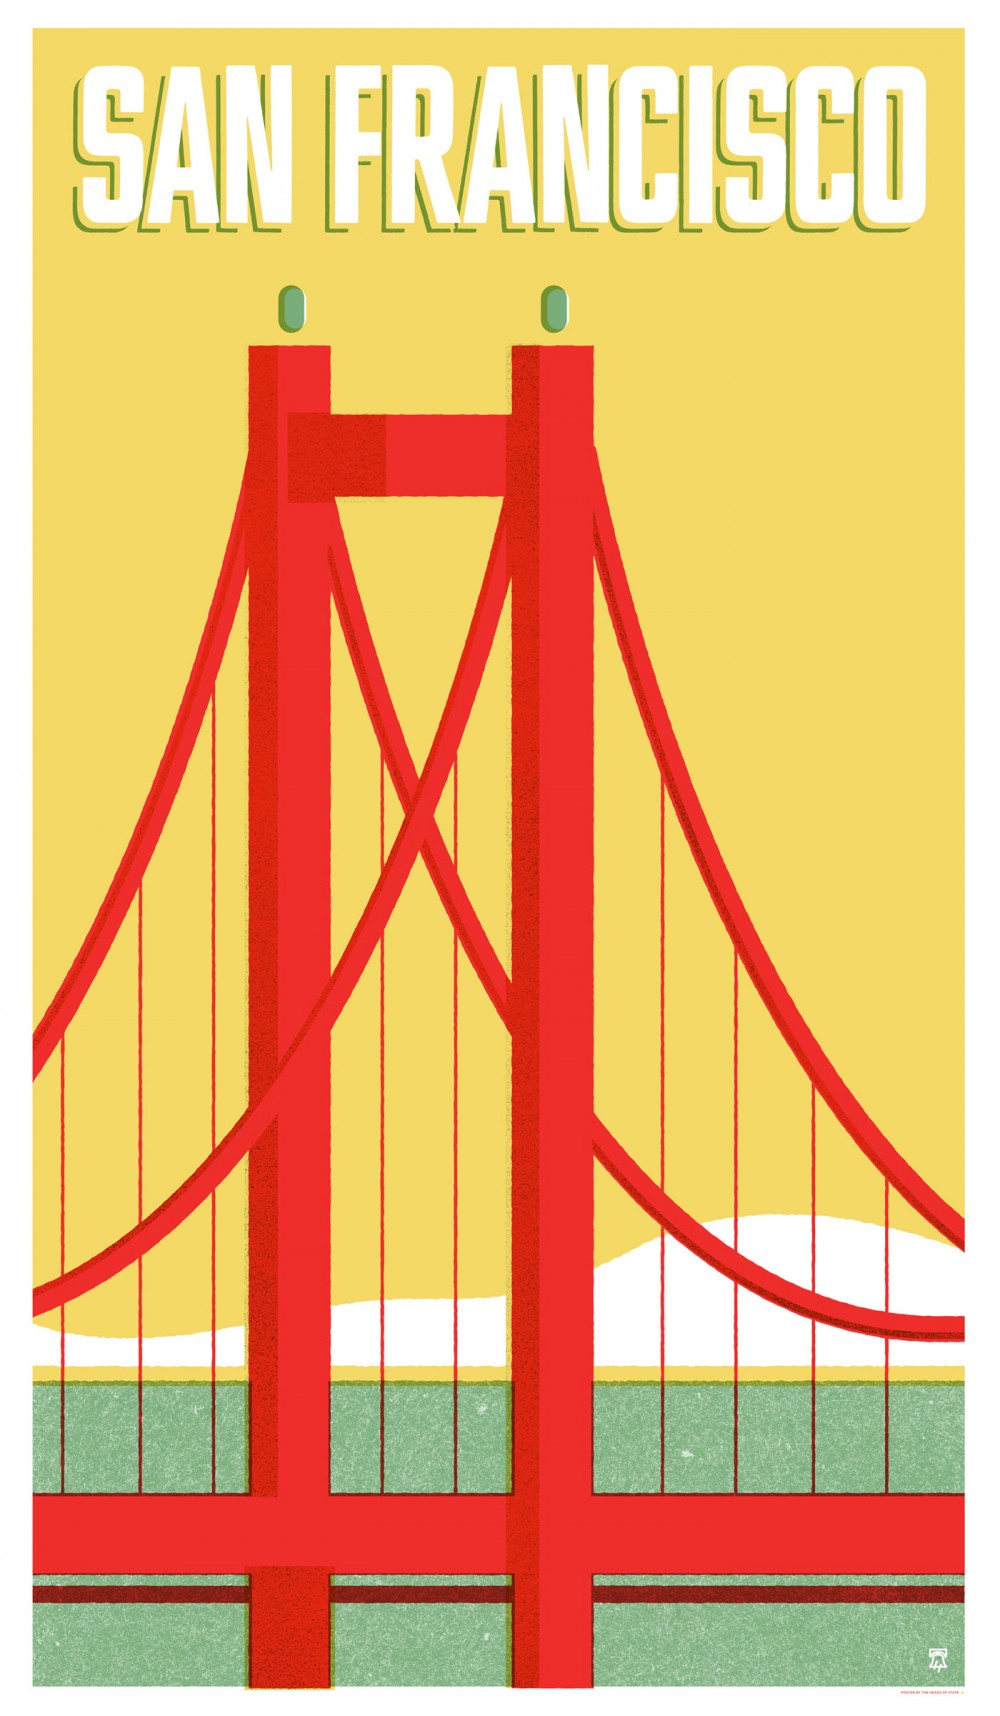 San Francisco, California - Travel Poster Series - The Heads of State